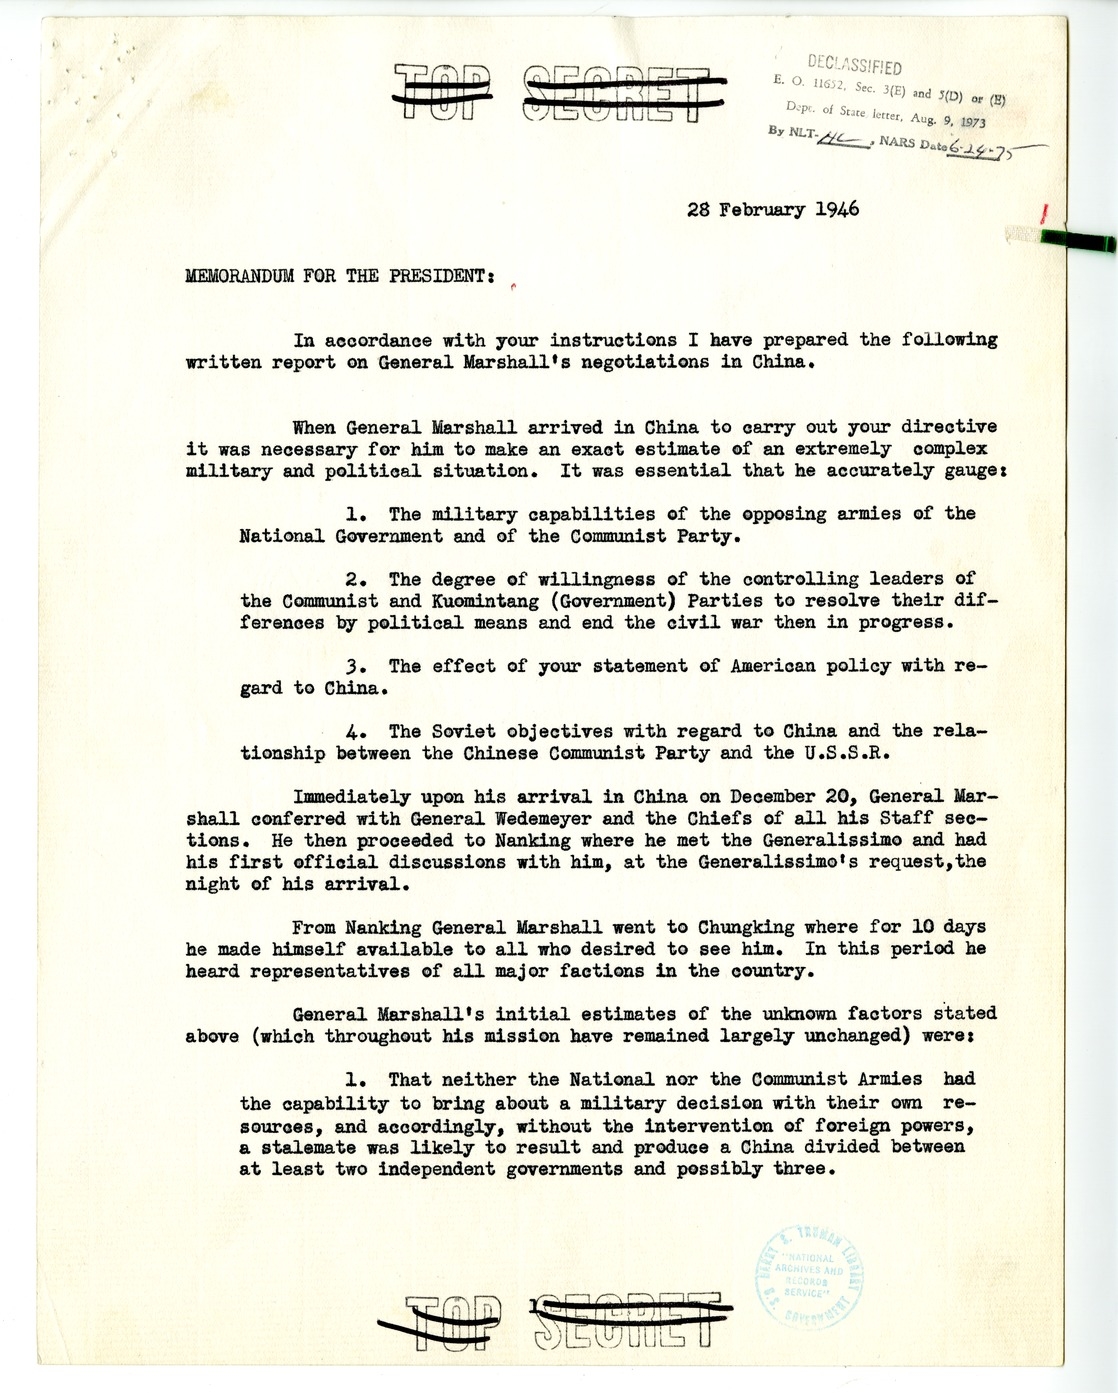 Memorandum from Secretary of State James Byrnes to Matthew Connelly, with Attached Memorandum from James Shepley to President Harry S. Truman